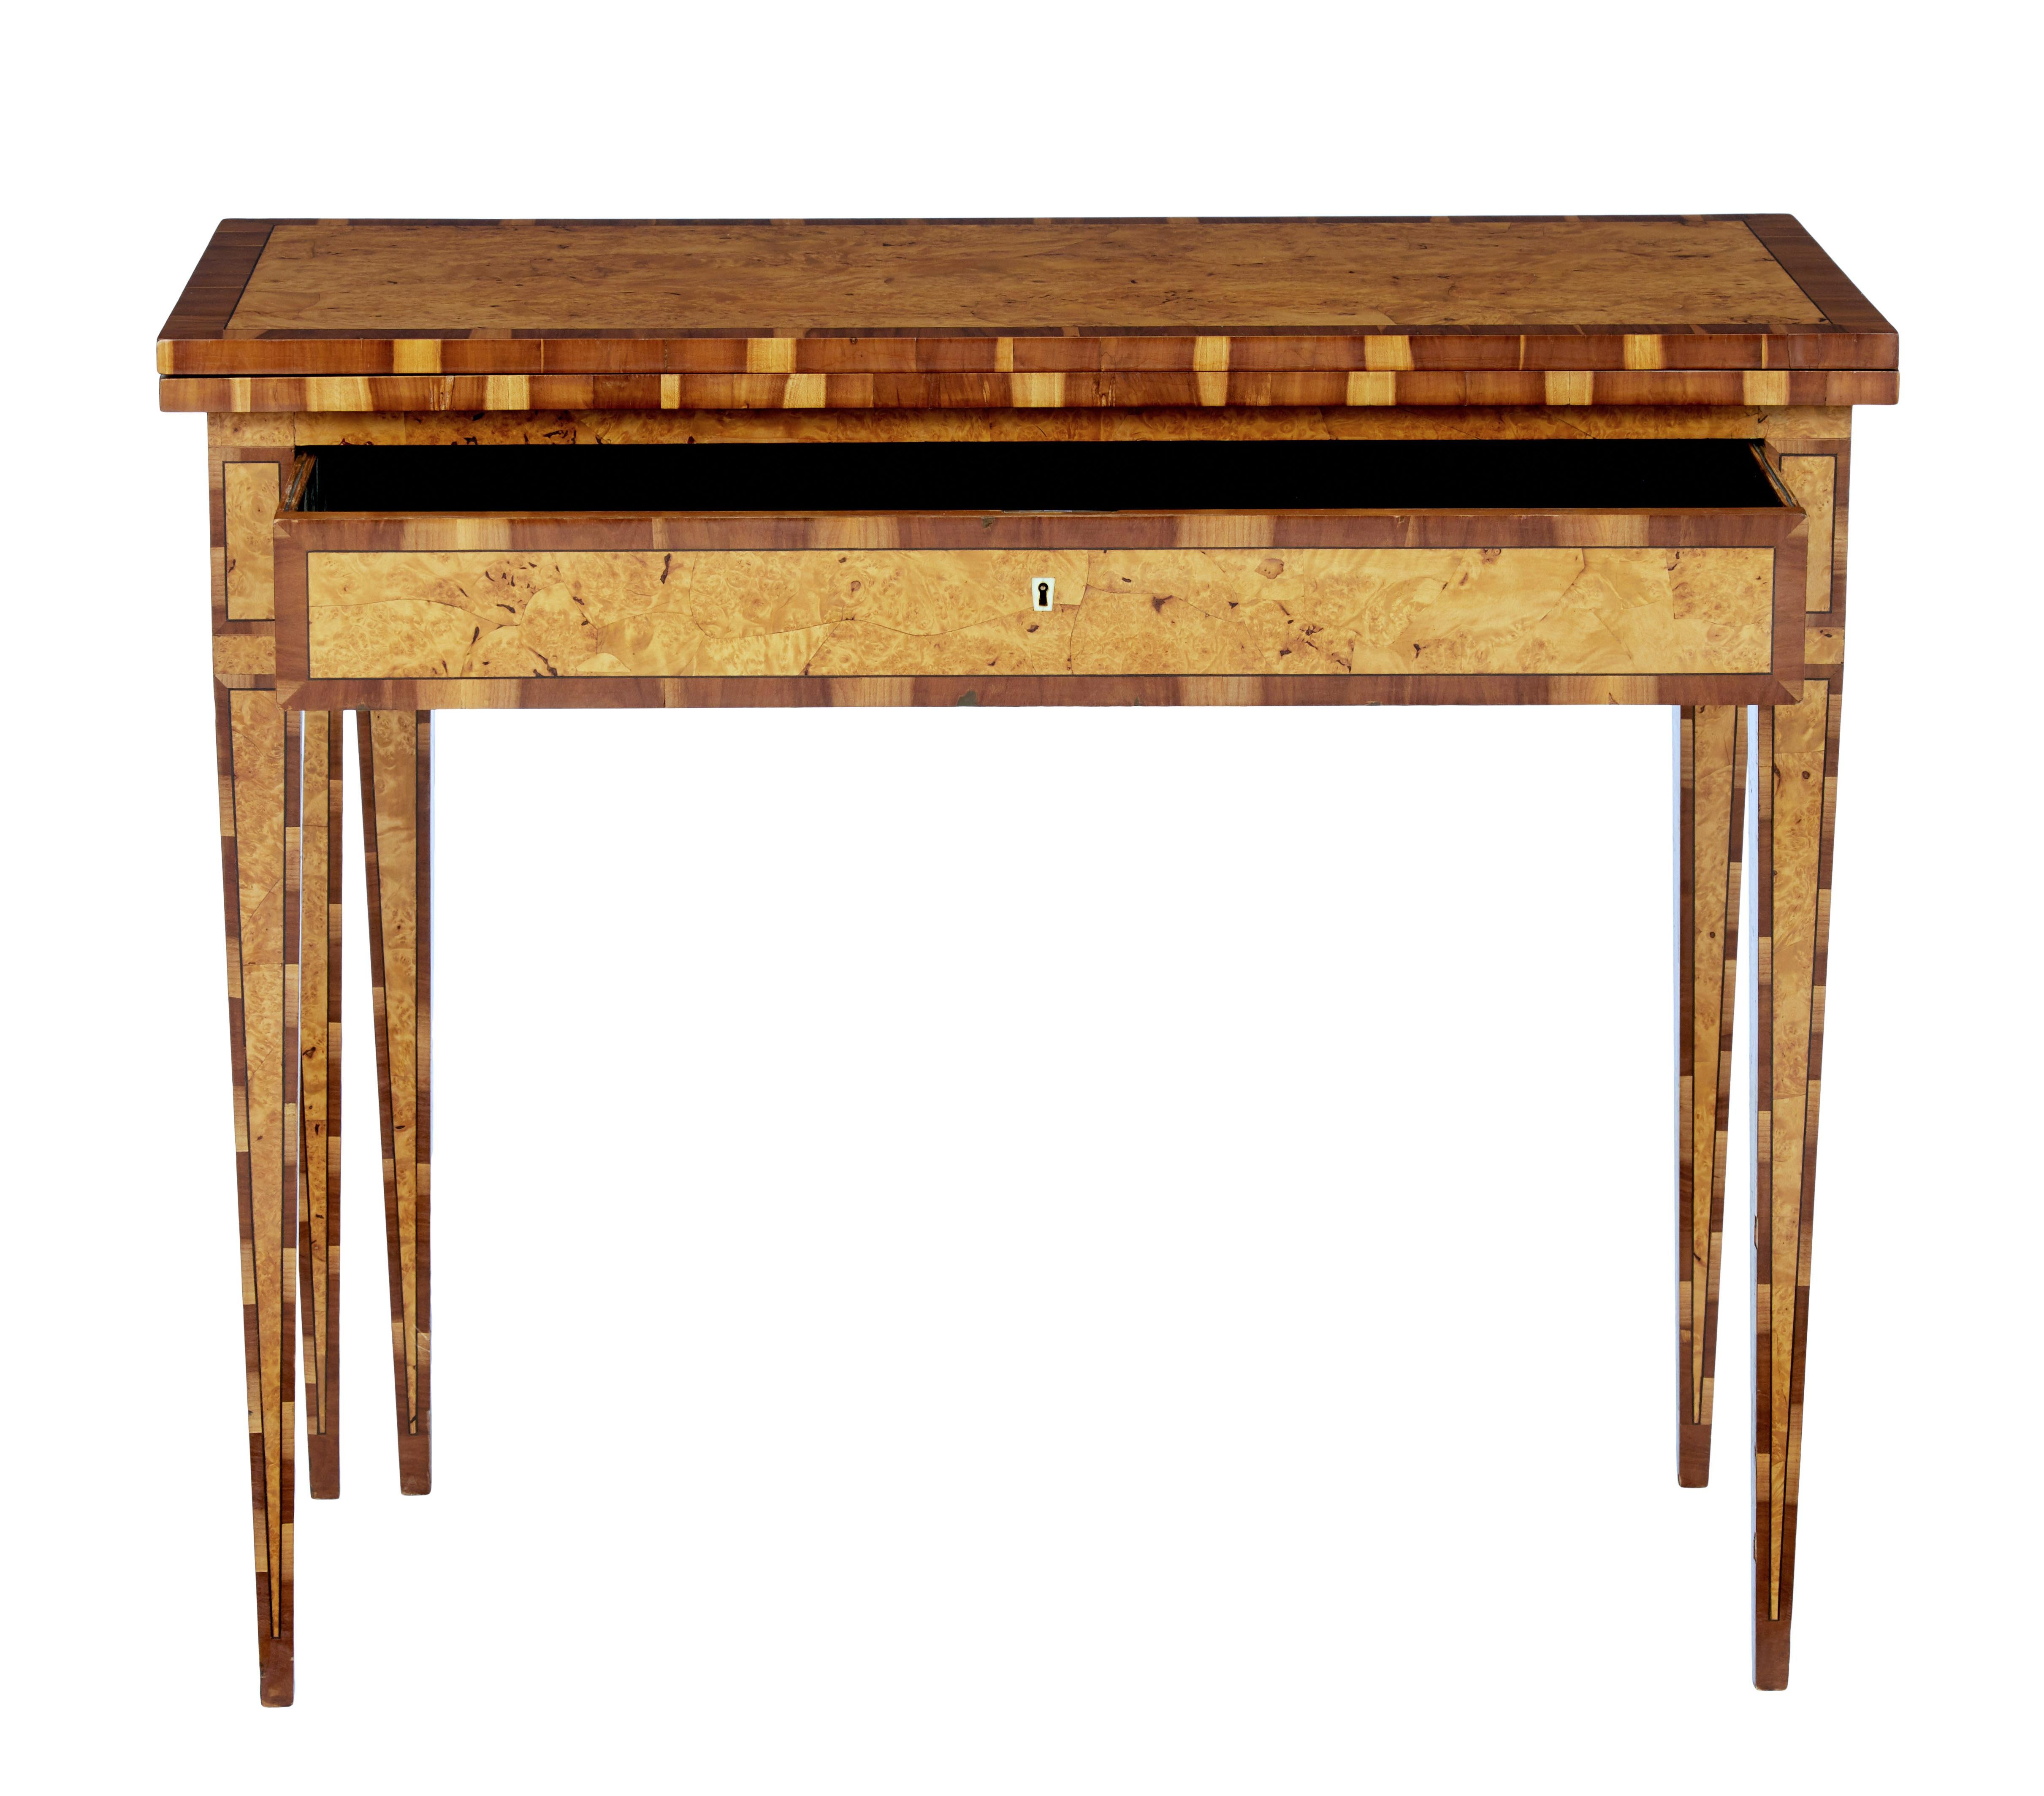 Rare burr birch and elm games table, circa 1860.

Beautiful rectangular burr birch tea table. Burr birch top with elm outer edge and ebonized stringing. Single drawer below the top surface, which has a hand painted back gammon board hand painted